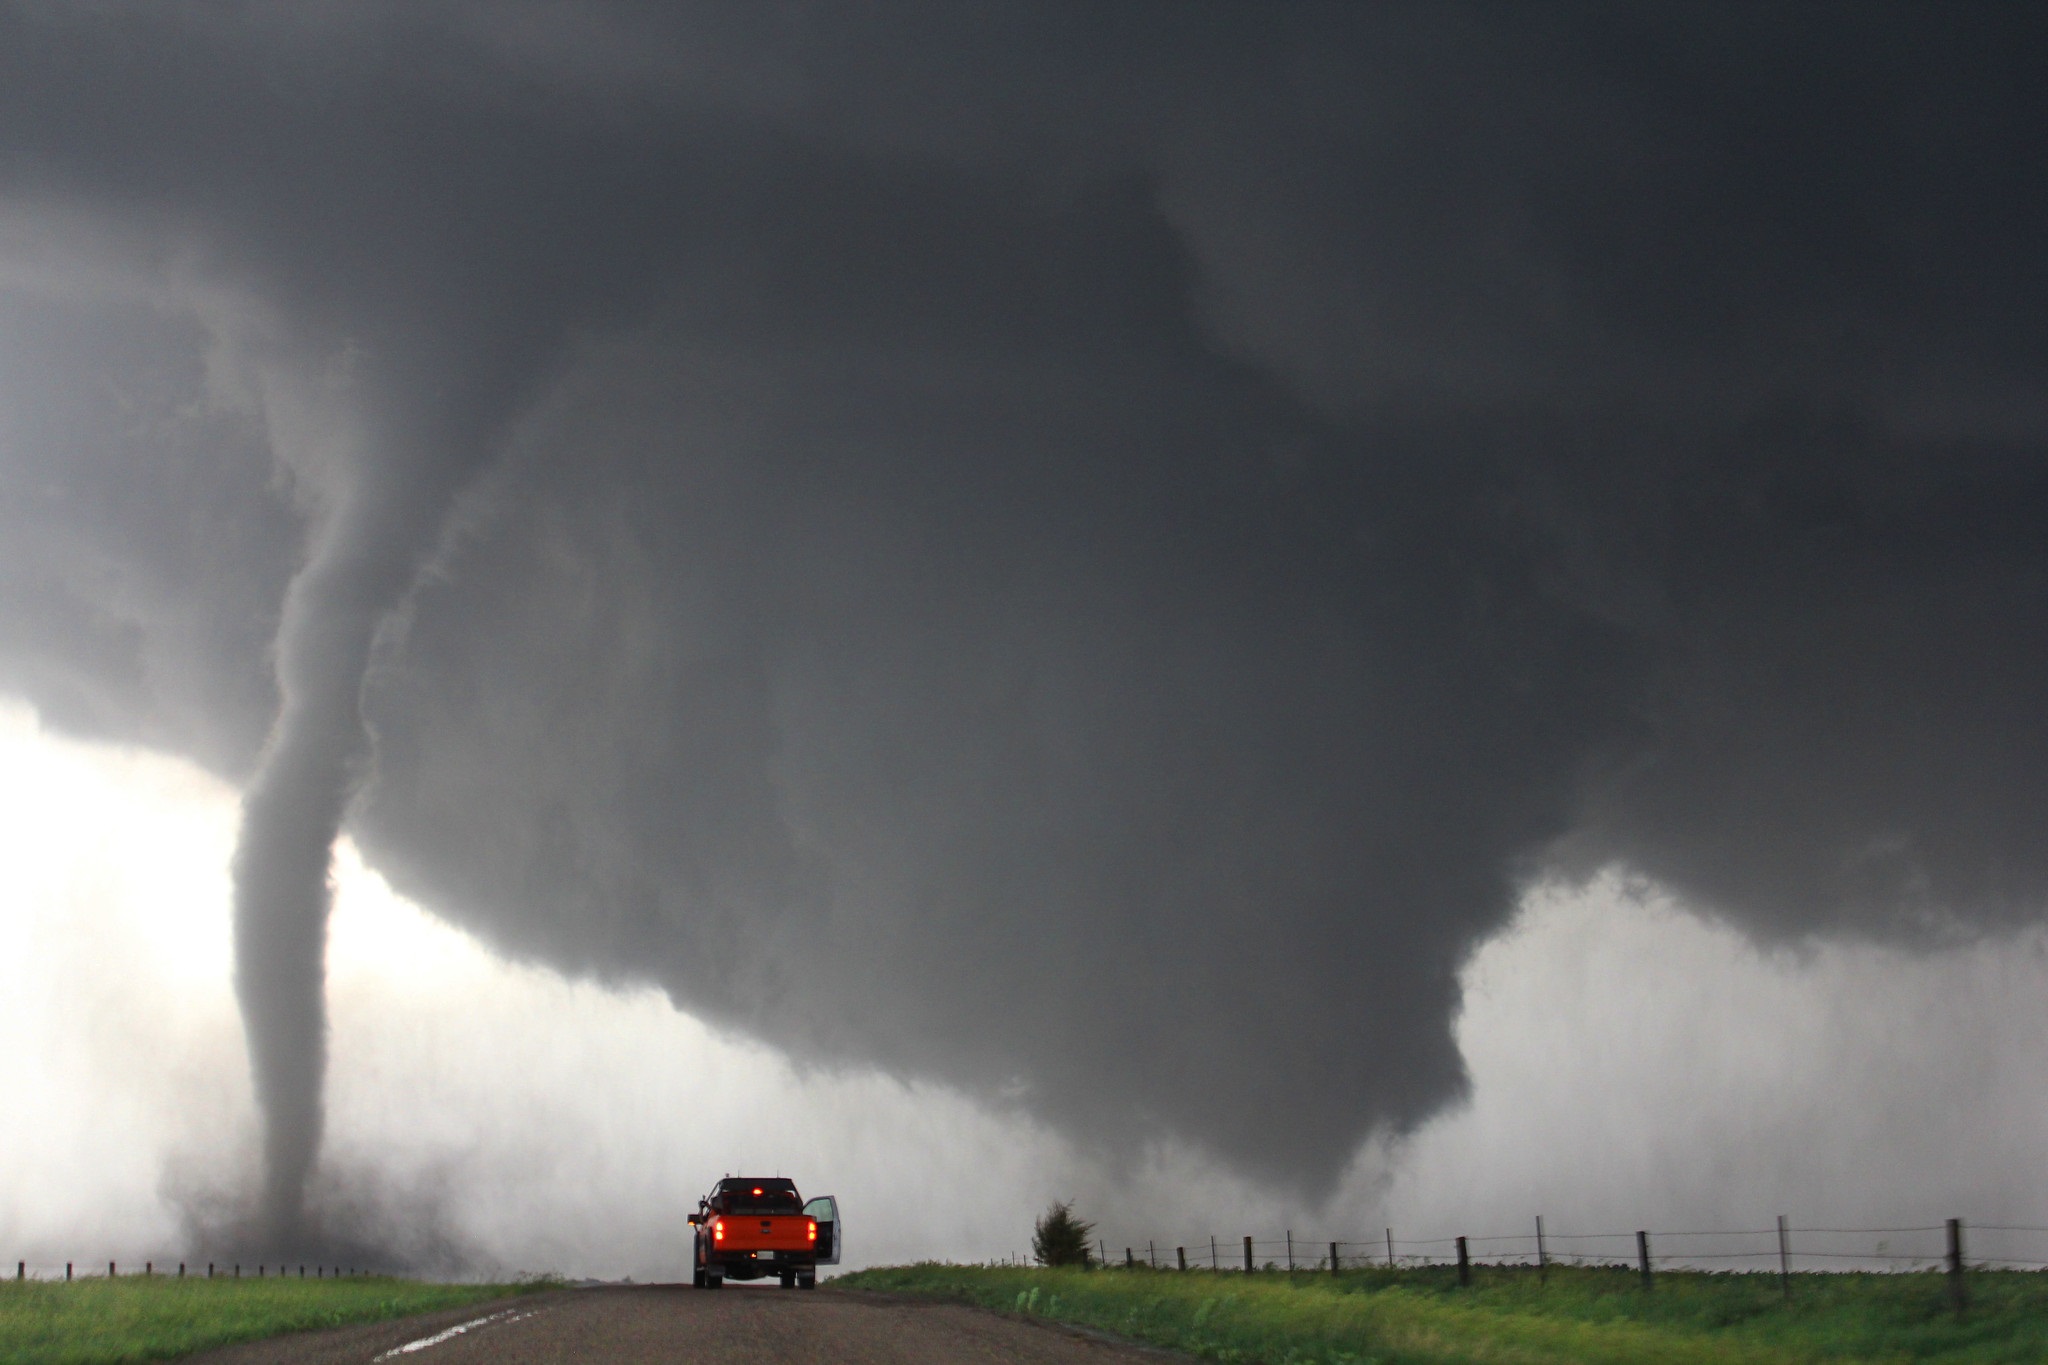 How To Stop A Tornado In 3 Ways | Popular Science